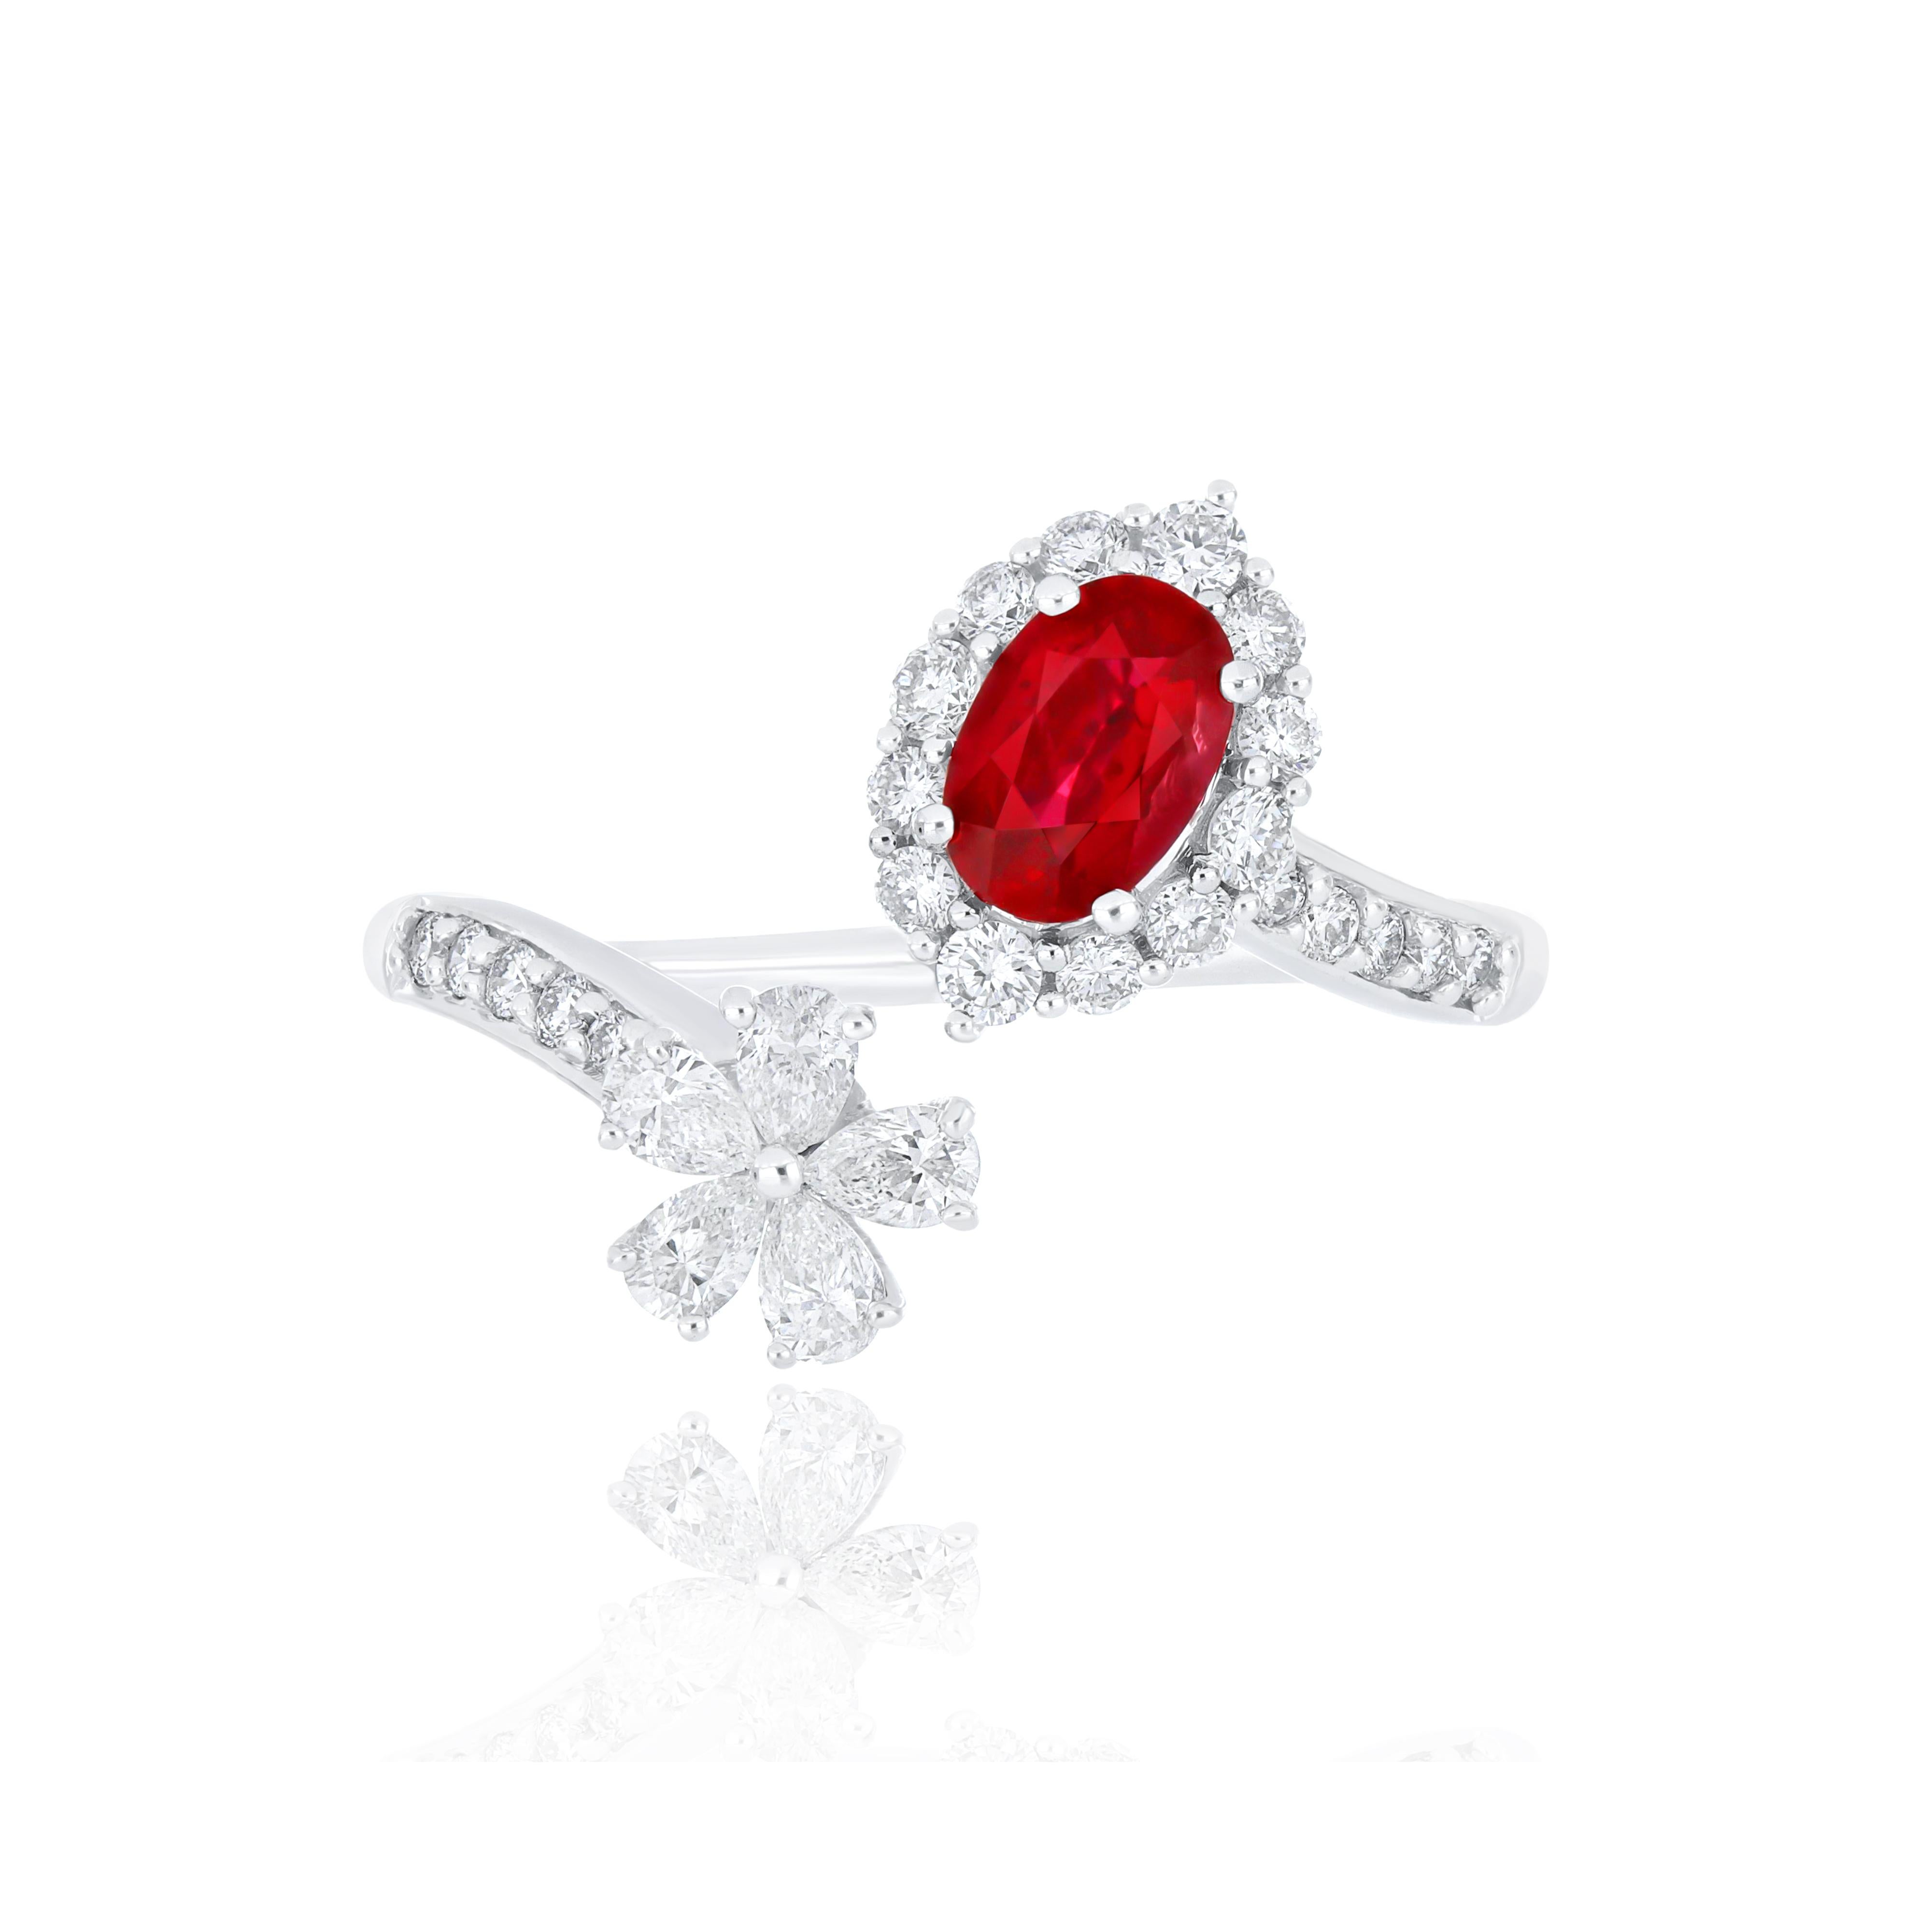 Elegant and exquisitely detailed 18 Karat White Gold Ring, center set with 0.56 Cts .Oval Shape Ruby Mozambique and micro pave set Diamonds, weighing approx. 0.59 Cts Beautifully Hand crafted in 18 Karat White Gold.

Stone Detail:
Ruby Mozambique: